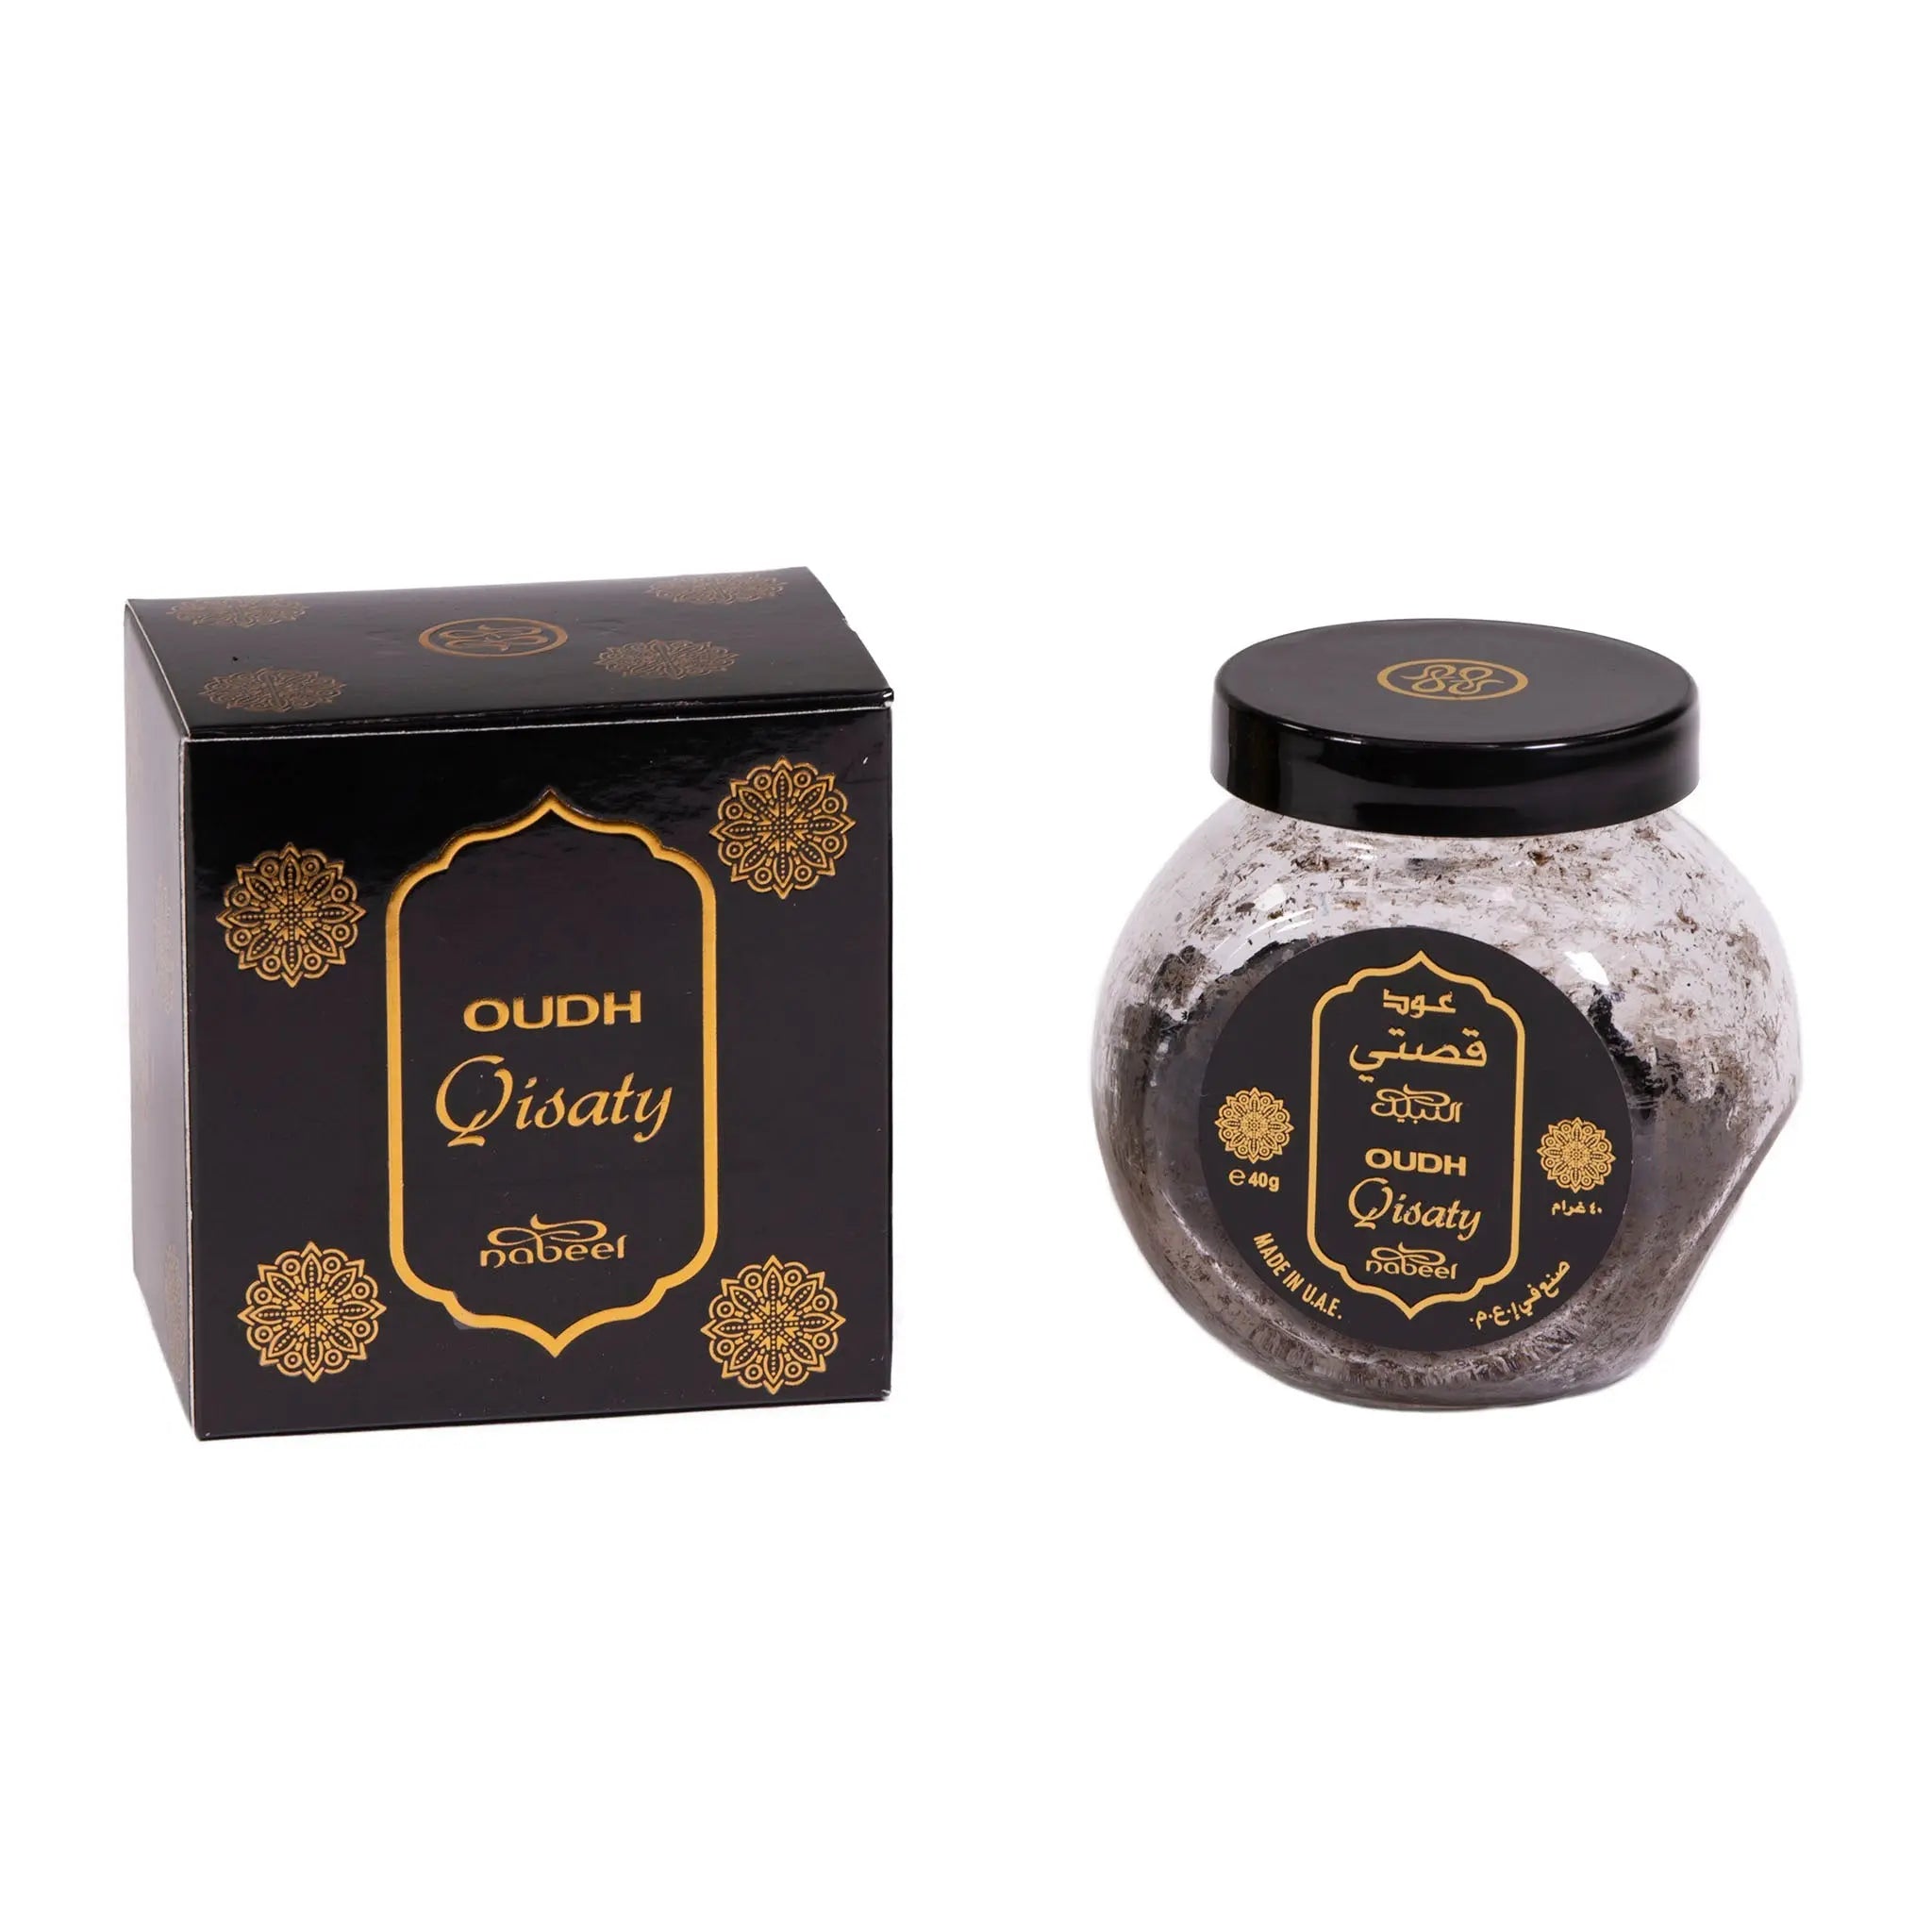 The image presents "OUDH Qistaty" by Nabeel, featuring a luxurious black box and a transparent glass jar with a black lid. Both items are adorned with elegant gold floral patterns and labels that include the product name in Arabic and English. The jar's label indicates the weight as "e 40g". The design of the packaging conveys an opulent and traditional aesthetic, with the black and gold color scheme adding a touch of sophistication.